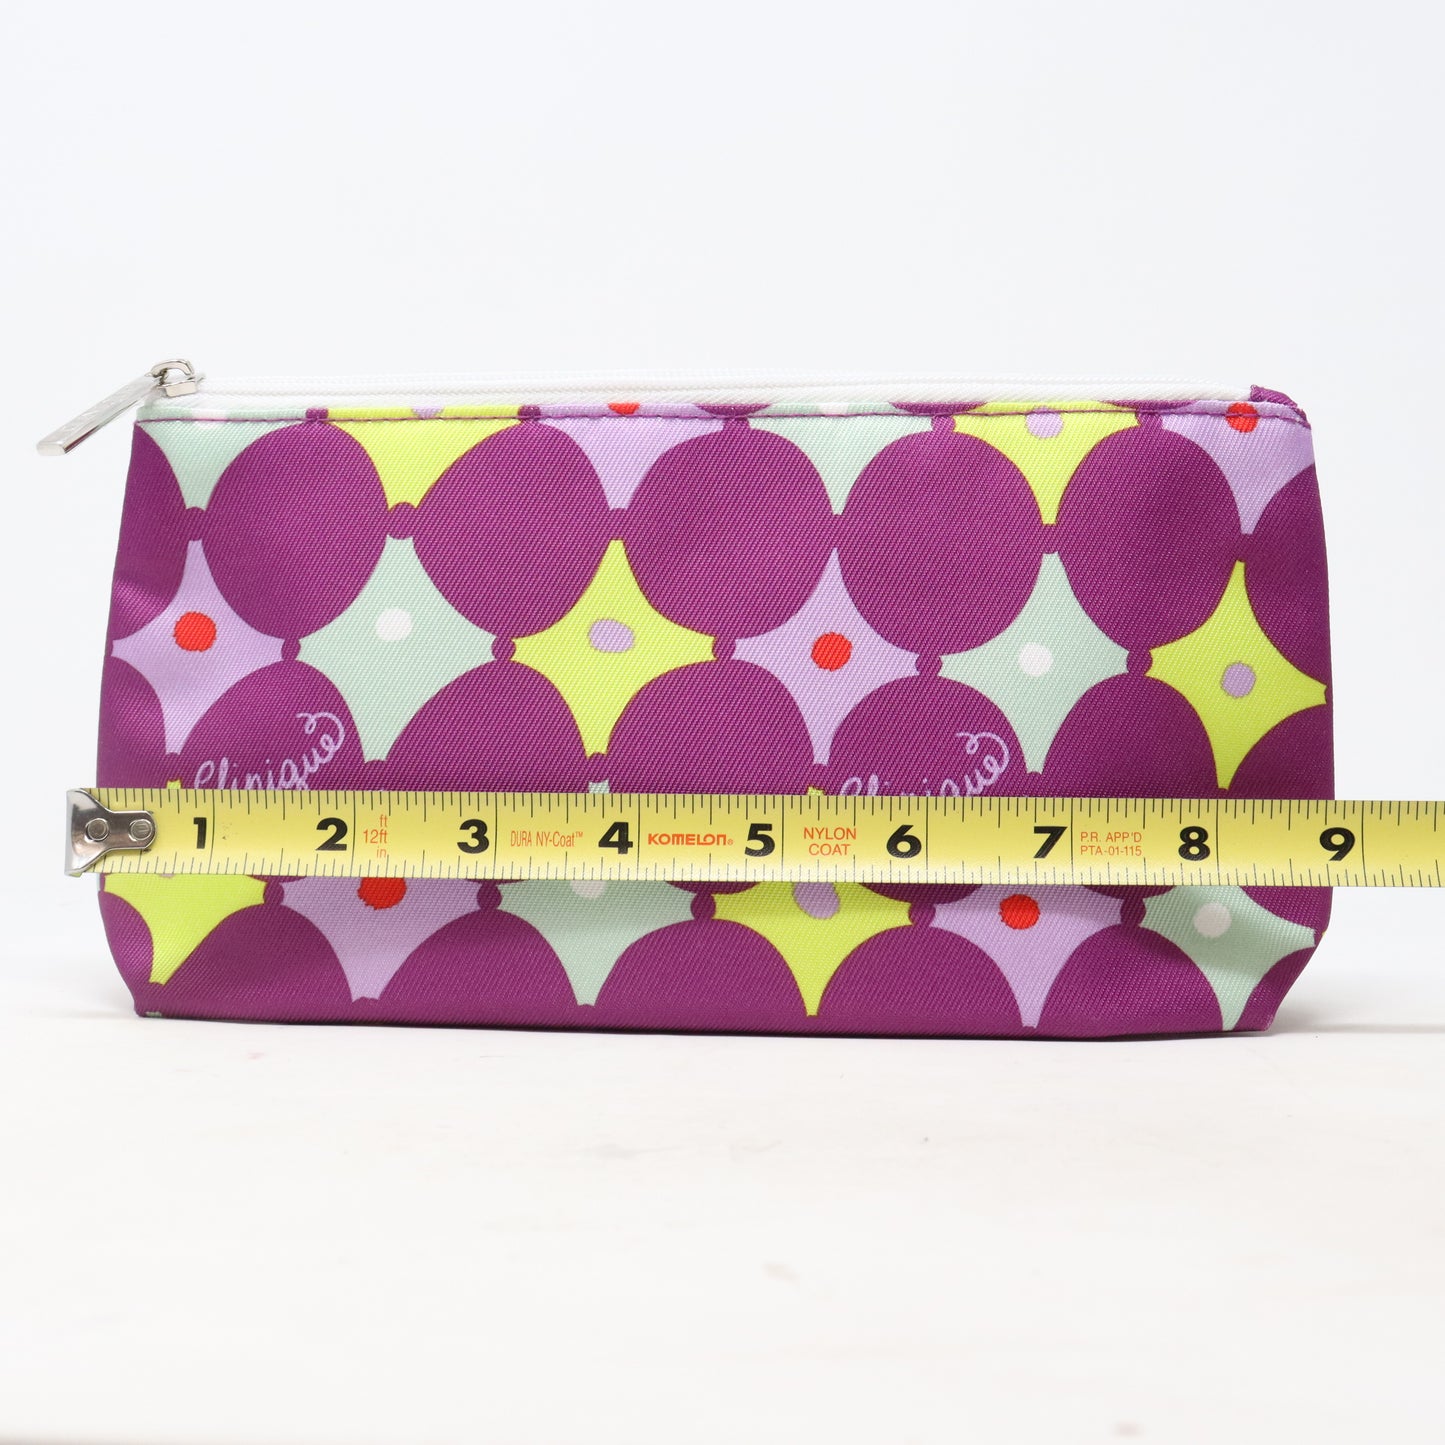 Clinique Multi-Color Patterned Cosmetic Bag  / New